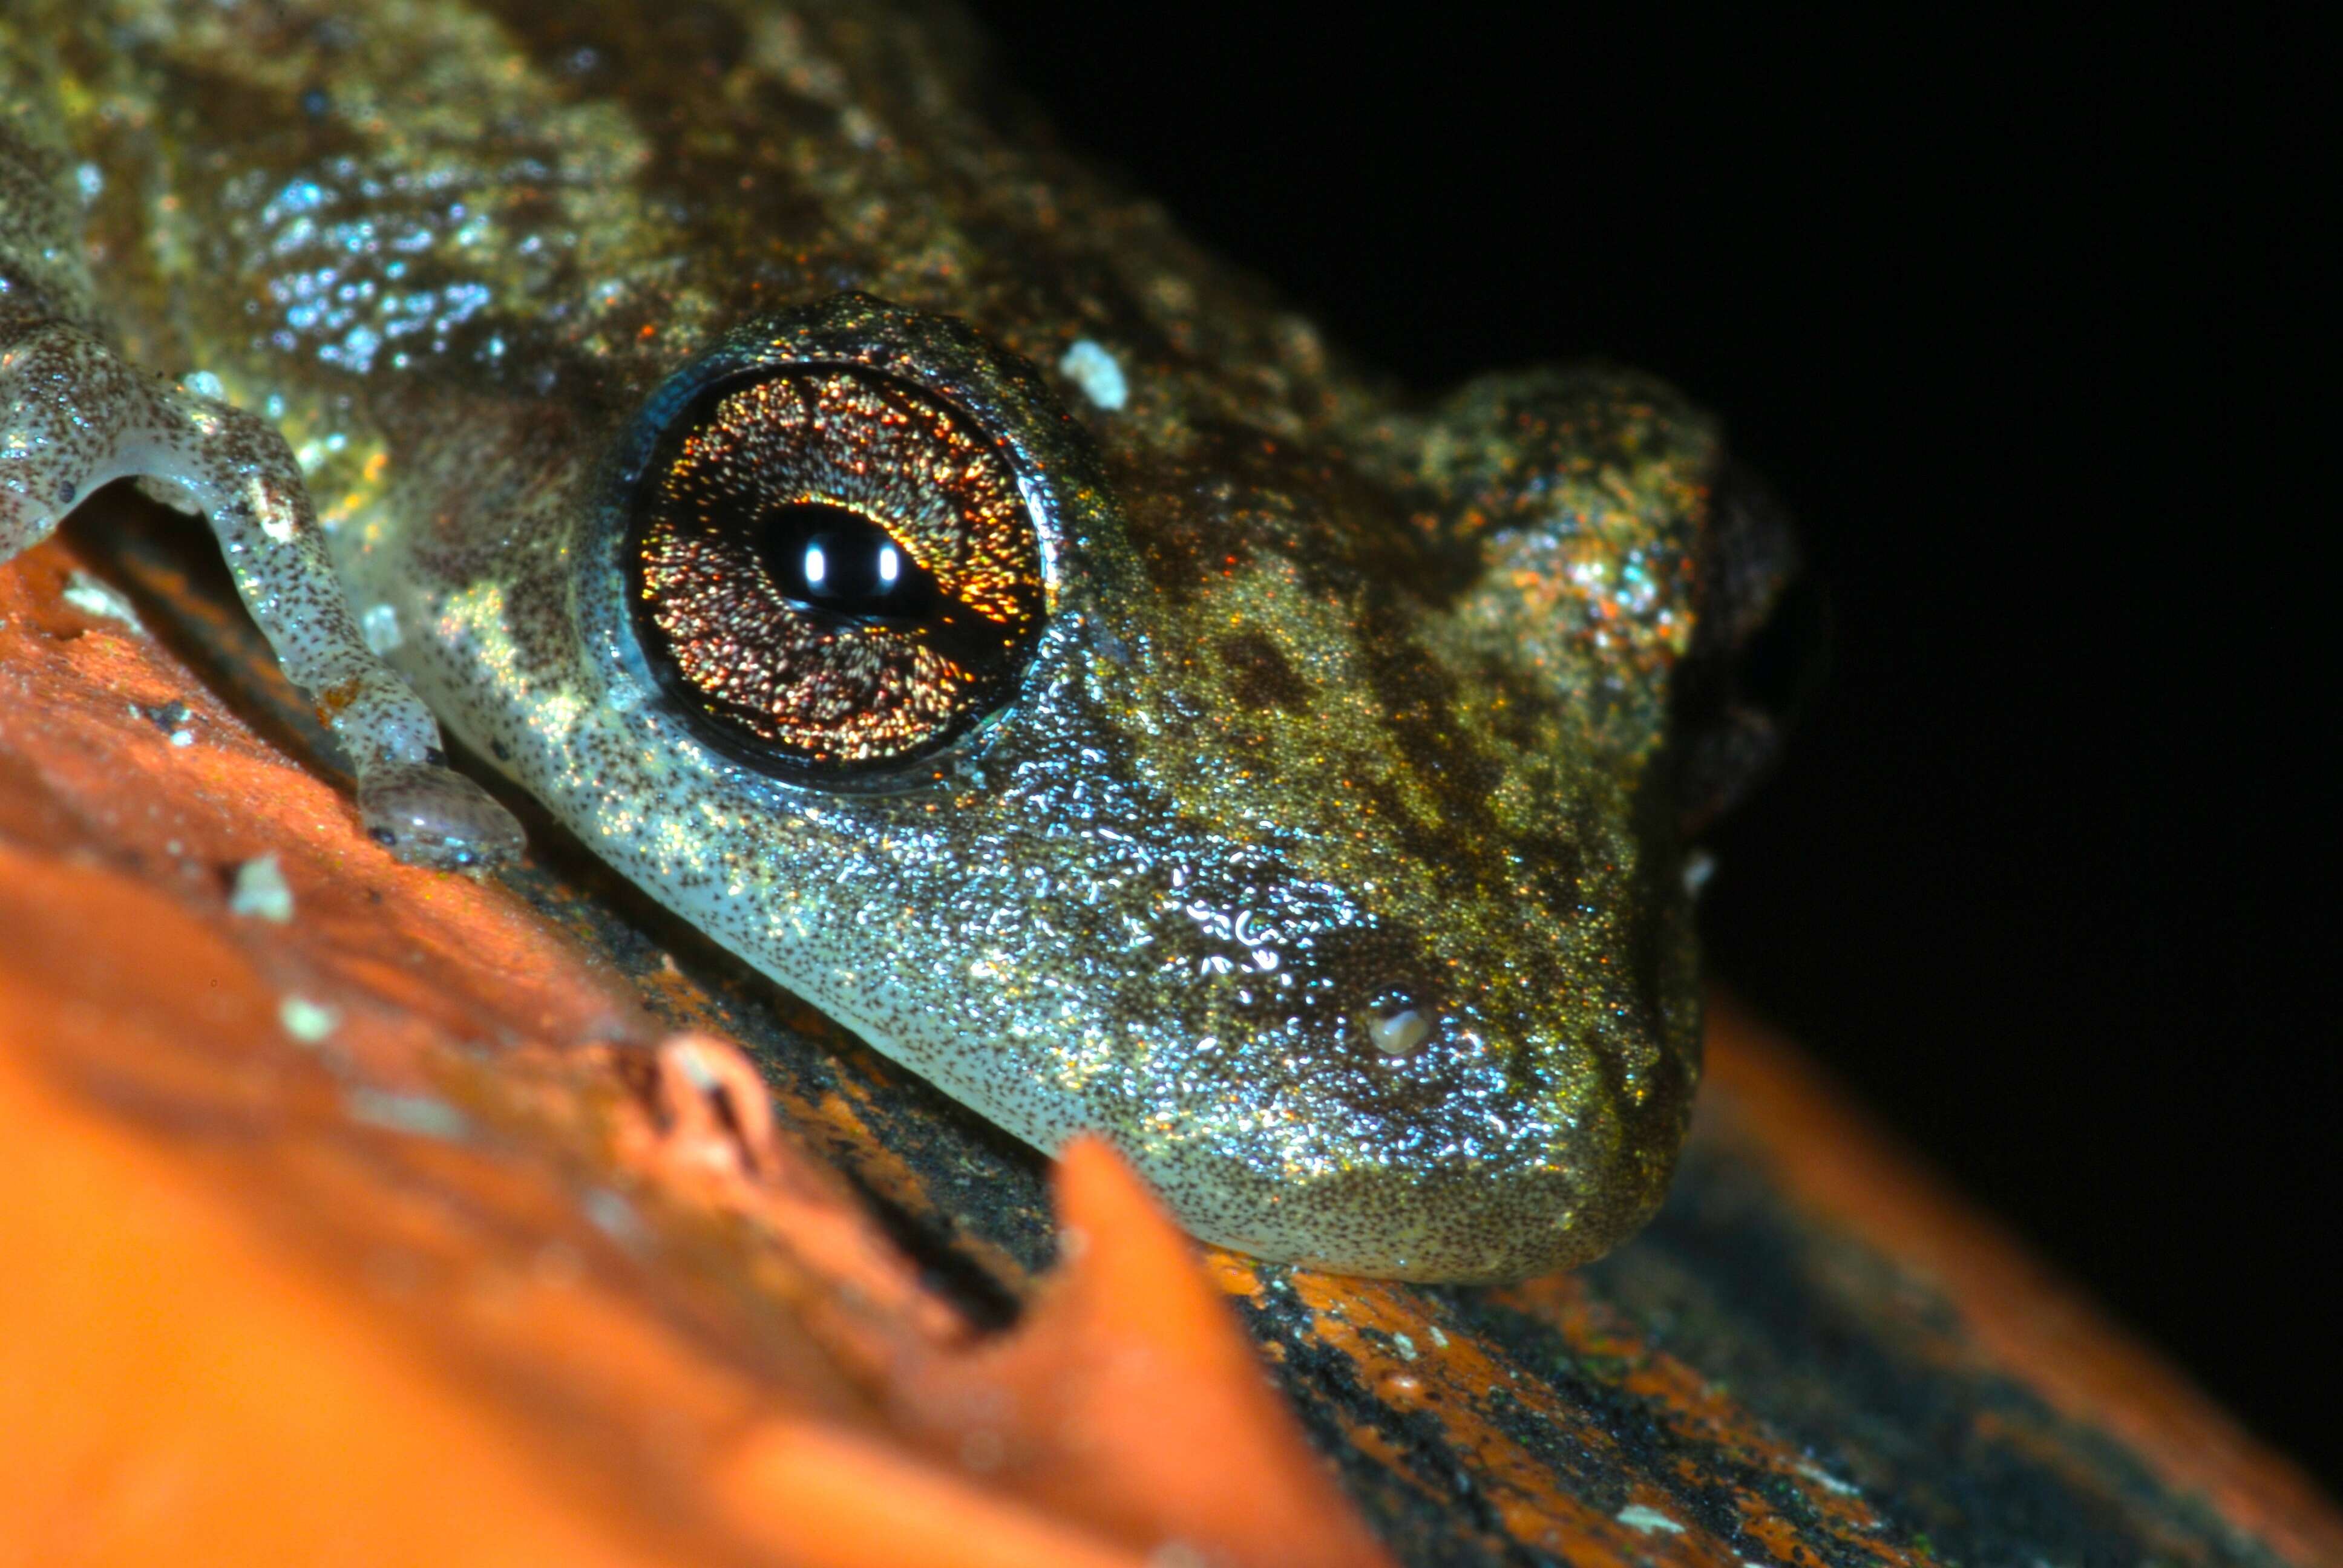 Image of Snouted Treefrogs